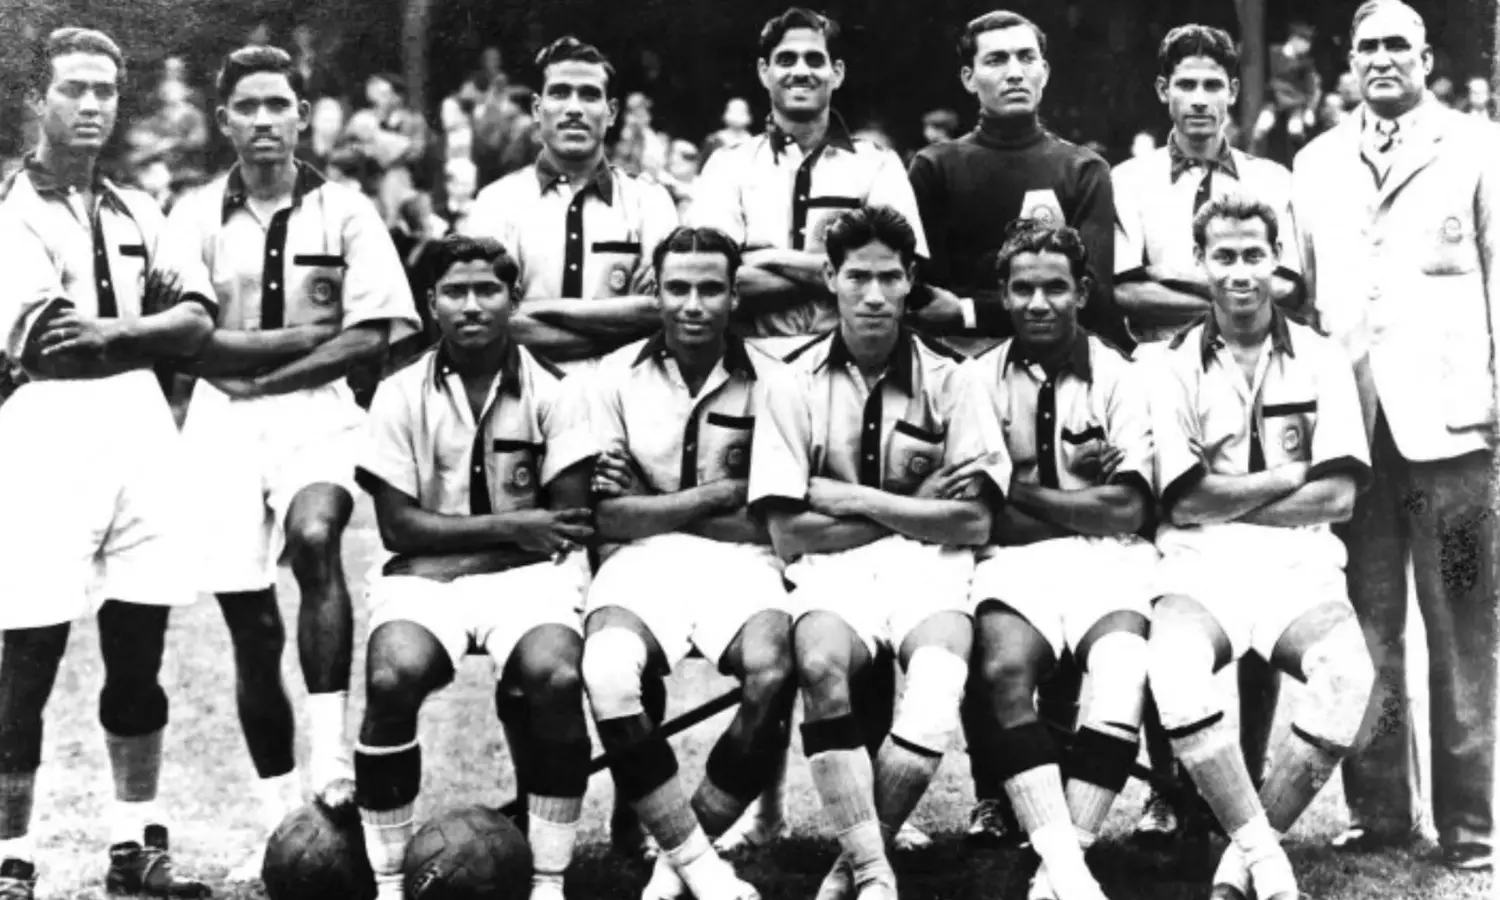 The Indian football team at the 1948 Olympics. A report of the match between India and France says 2 Indian players wore boots. (File Photo/Getty)